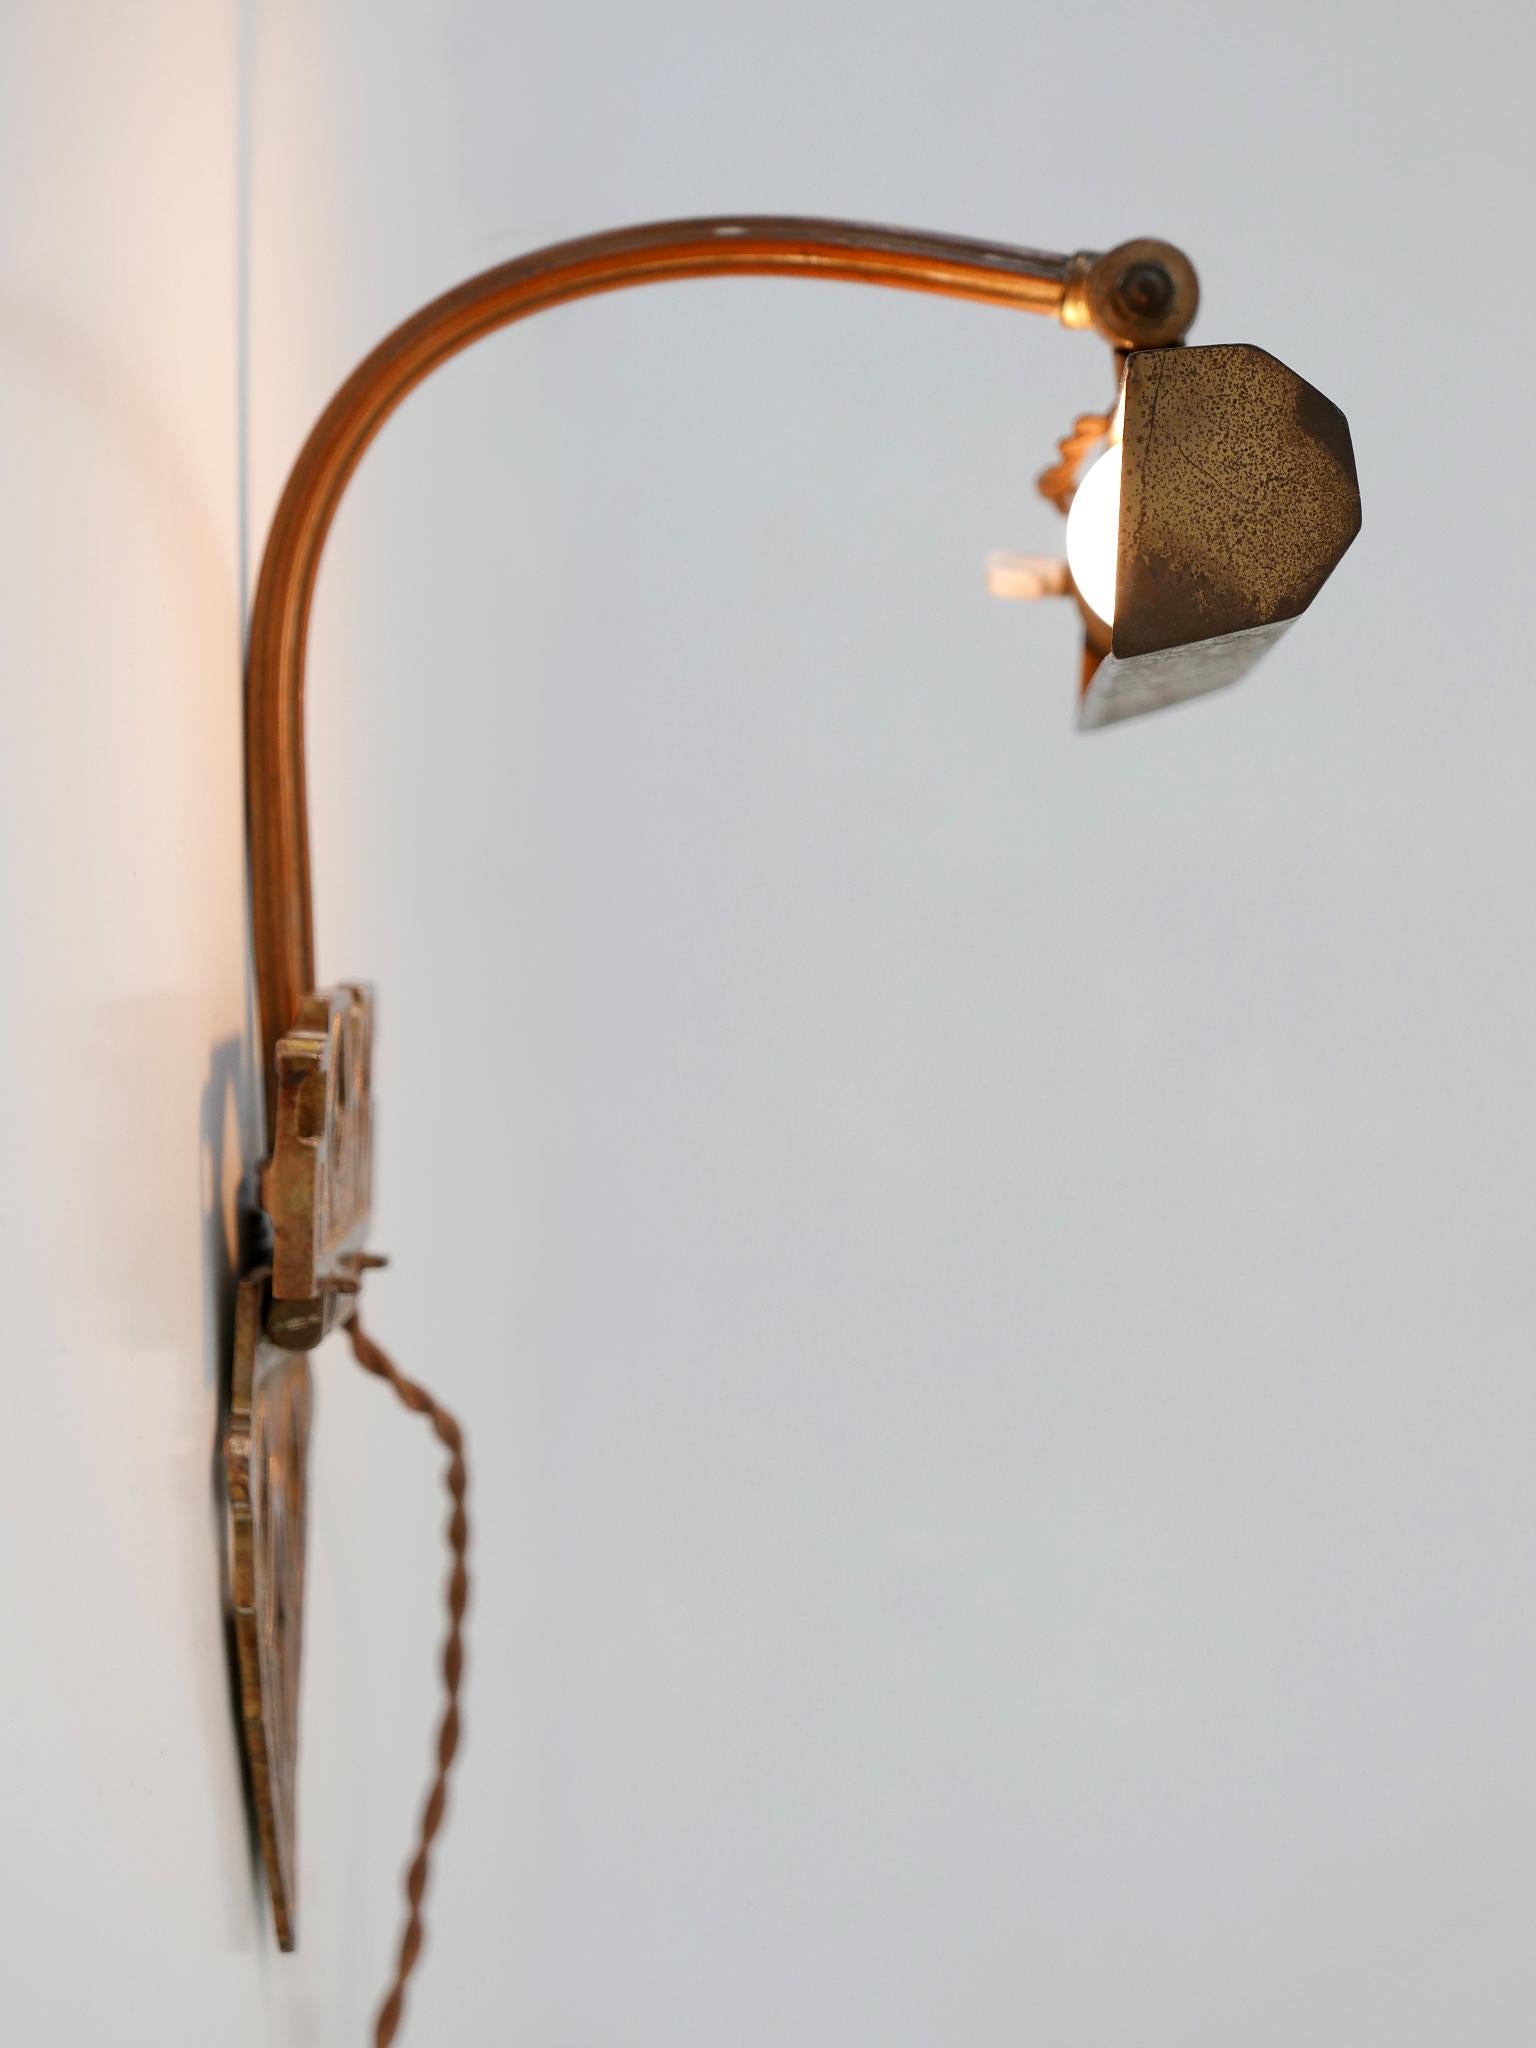 Rare & Elegant Art Nouveau Hammered Brass Sconce or Wall Lamp Germany 1900s For Sale 5